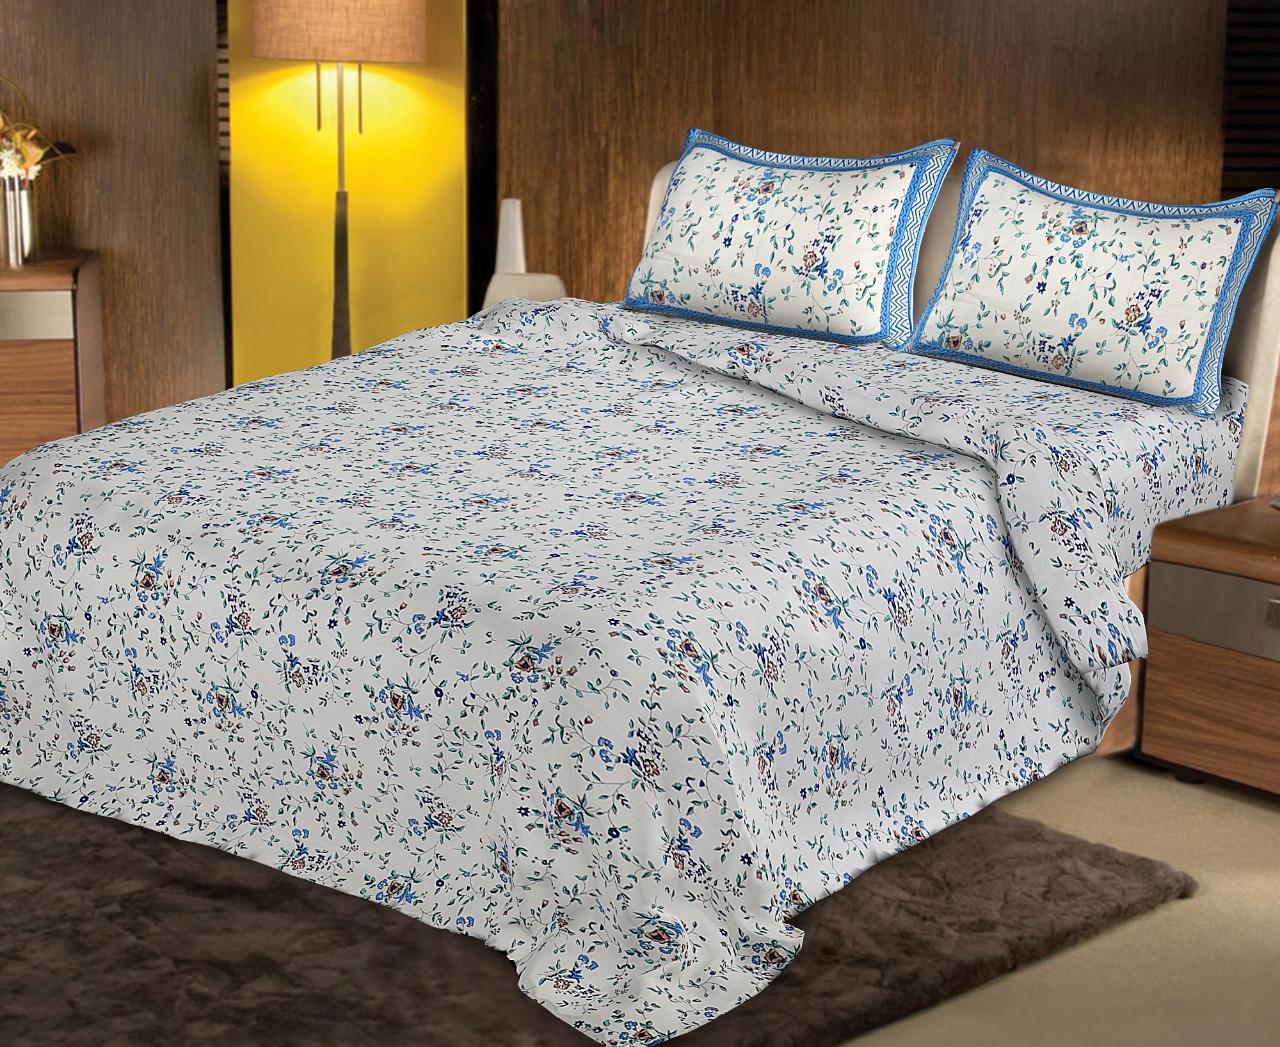 Pure Cotton 240 TC Double bedsheet in blue seamless floral print